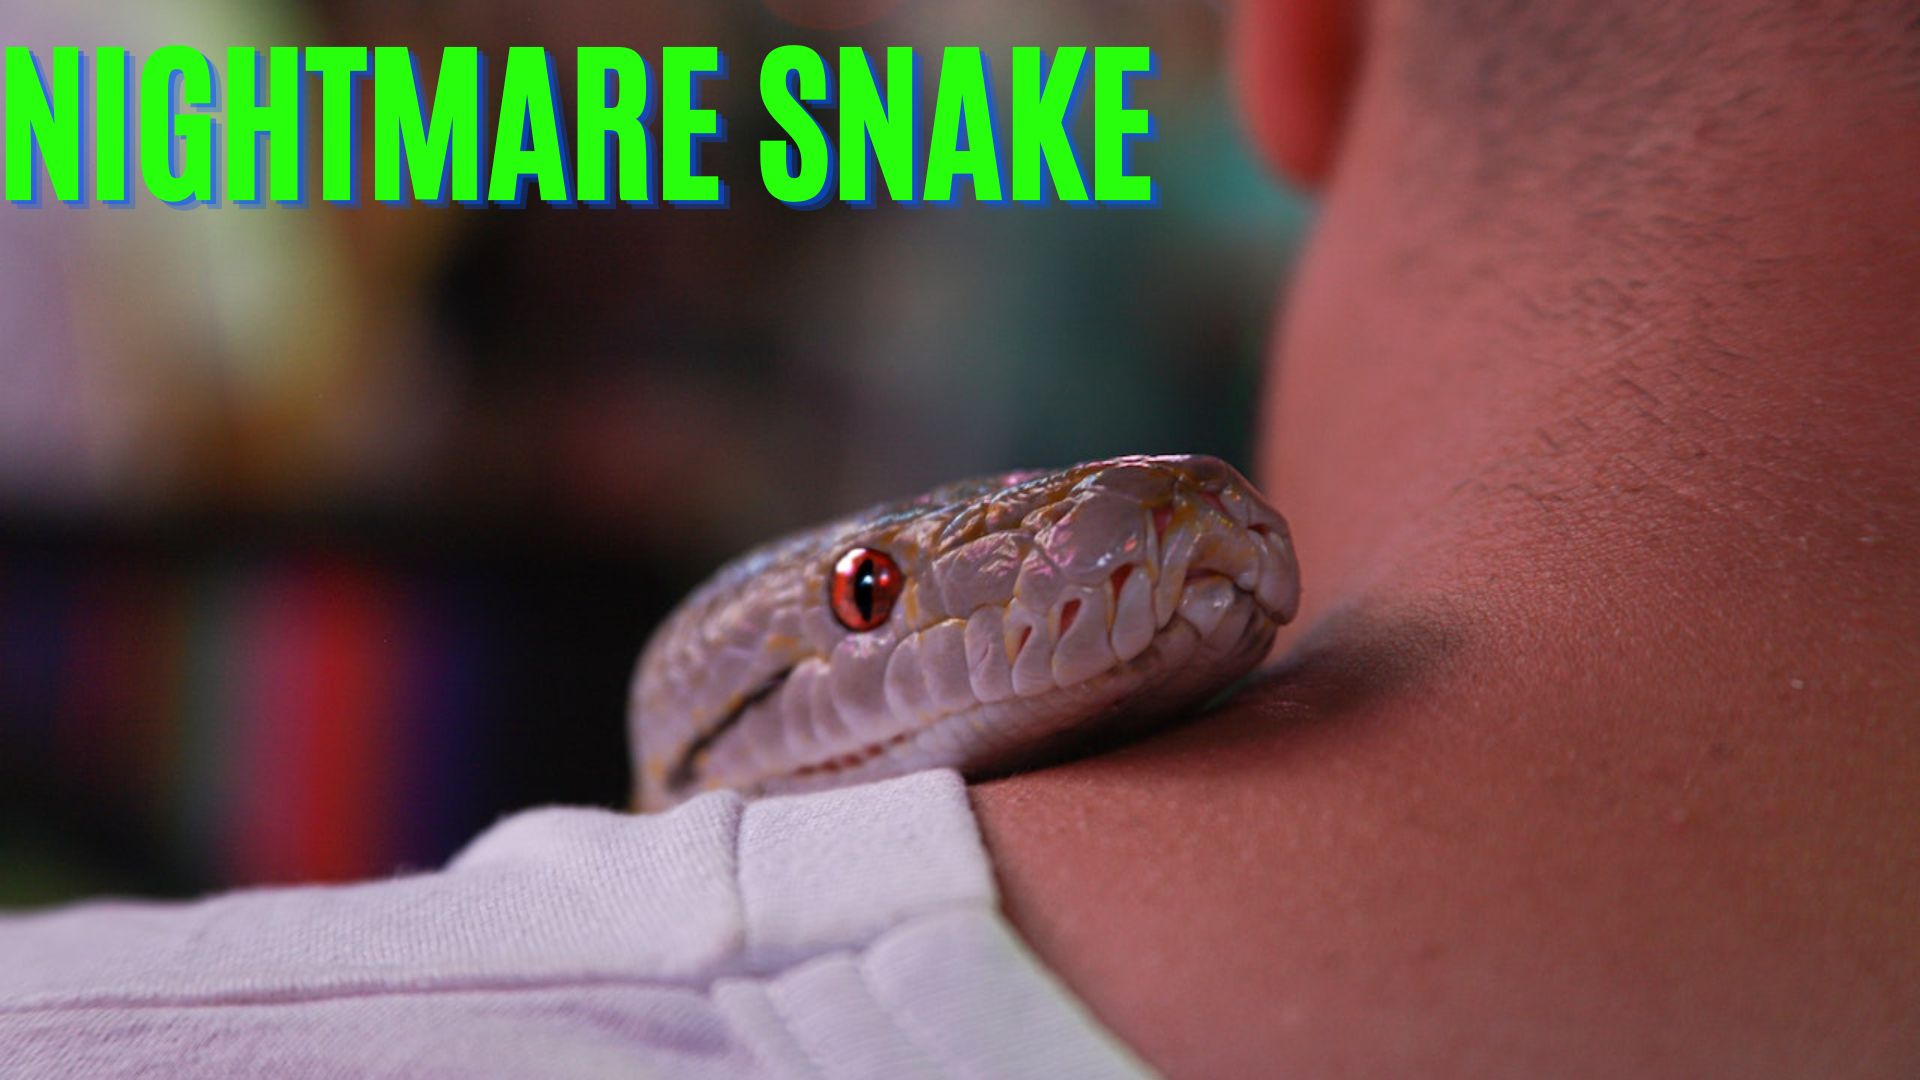 Nightmare Snake - Fears About Personal Safety